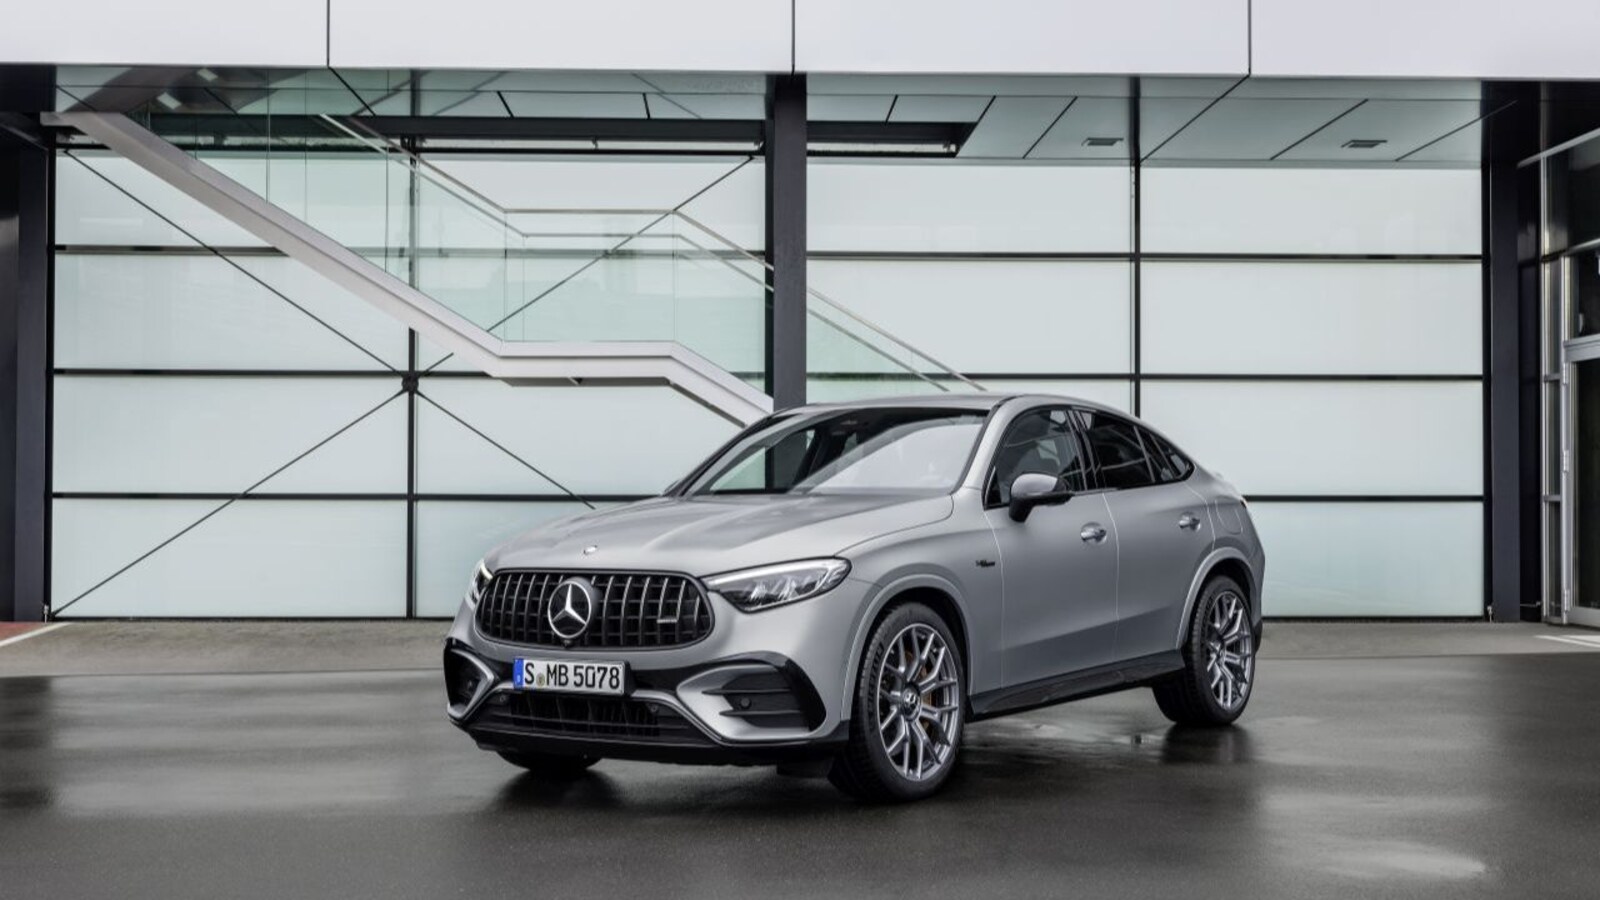 Mercedes-AMG unveils GLC Coupe 43 and GLC 63 S E Performance: Take a look